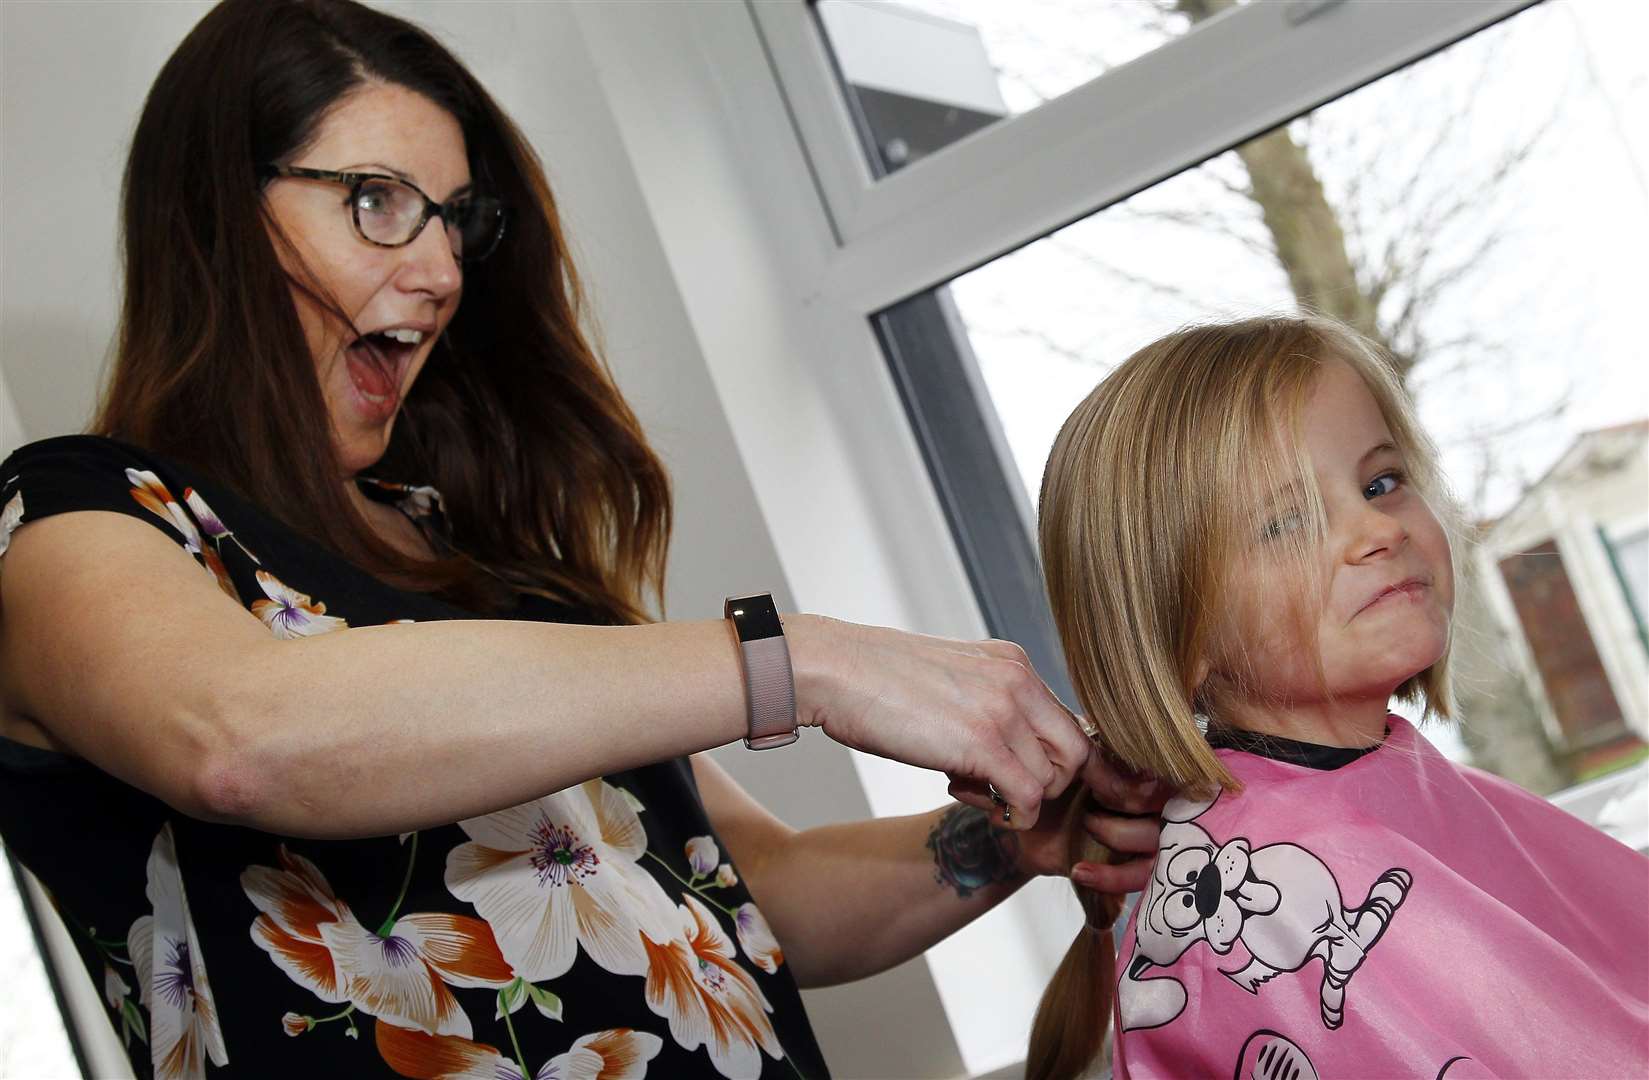 Seven-year-old Tilly has her hair cut for charity by stylist Stacy Thorne at Cut and Glow in Leysdown